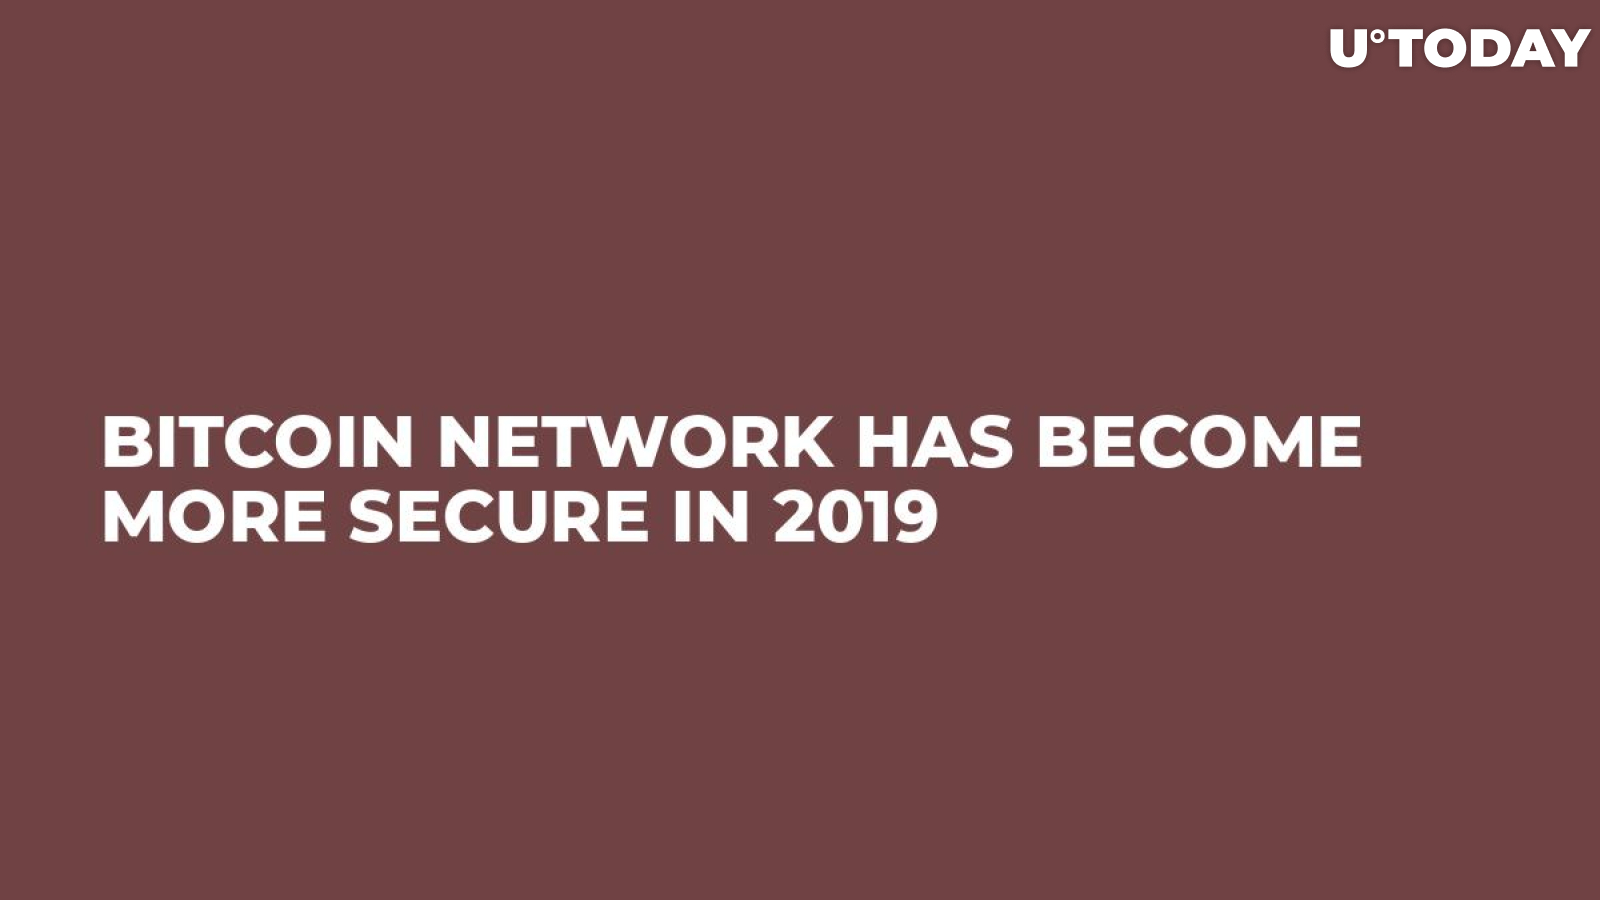 Bitcoin Network Has Become More Secure in 2019